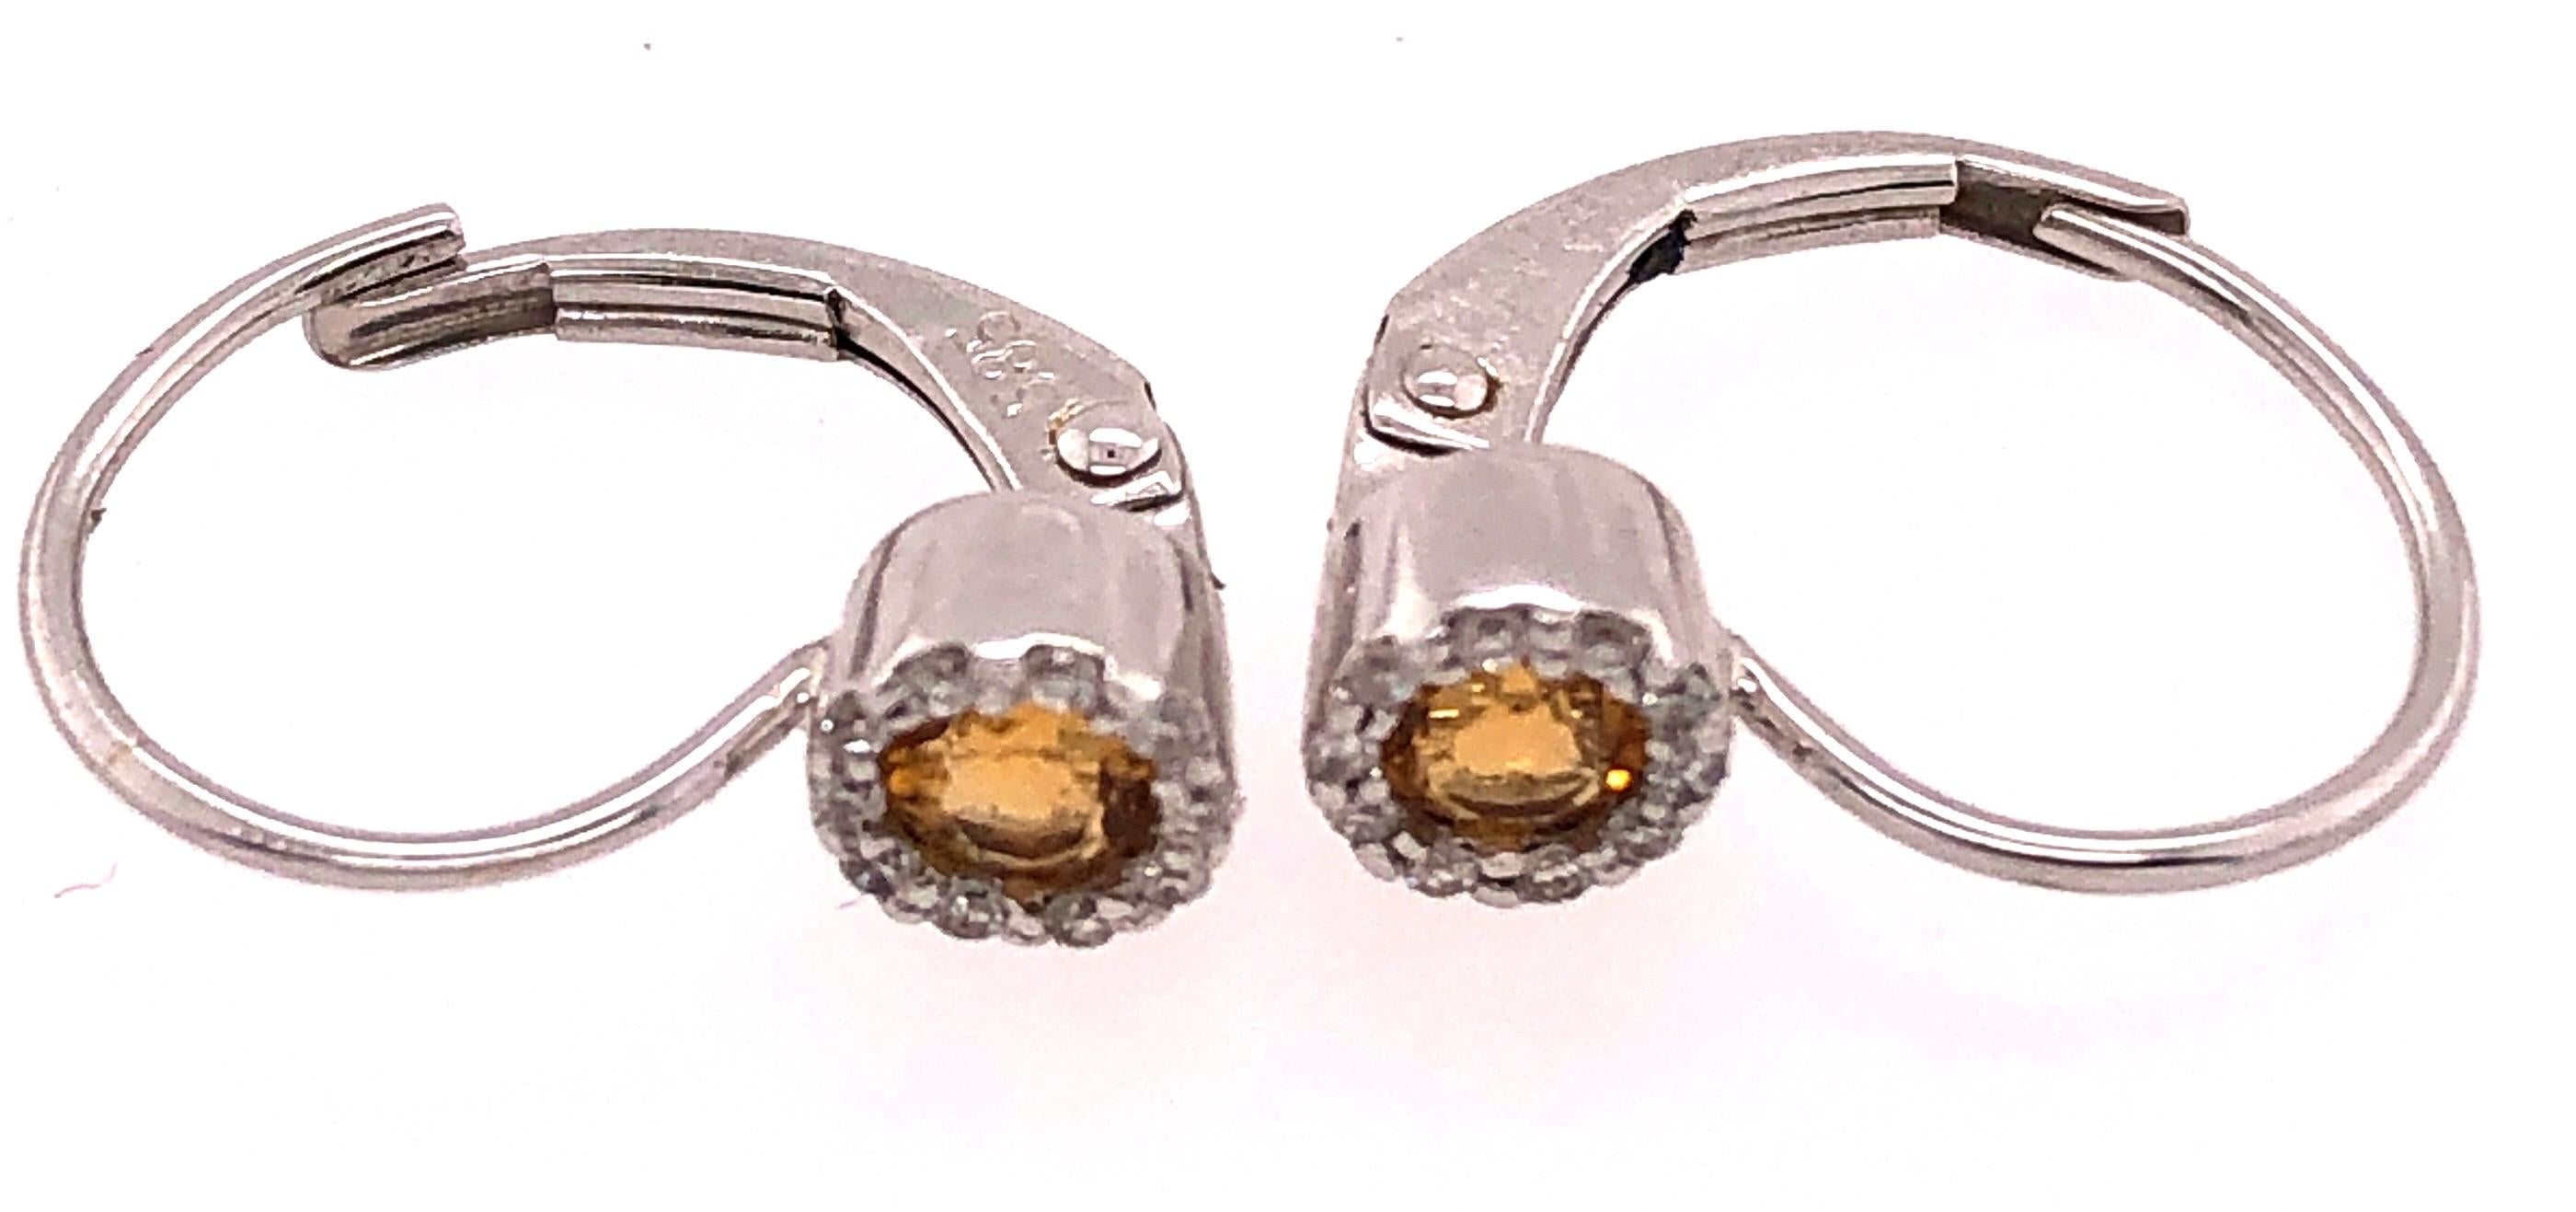 14Kt Lever Back Yellow Topaz with Diamond Earrings 1.10 grams total weight. .15 Total Diamond Weight
20 total diamonds.